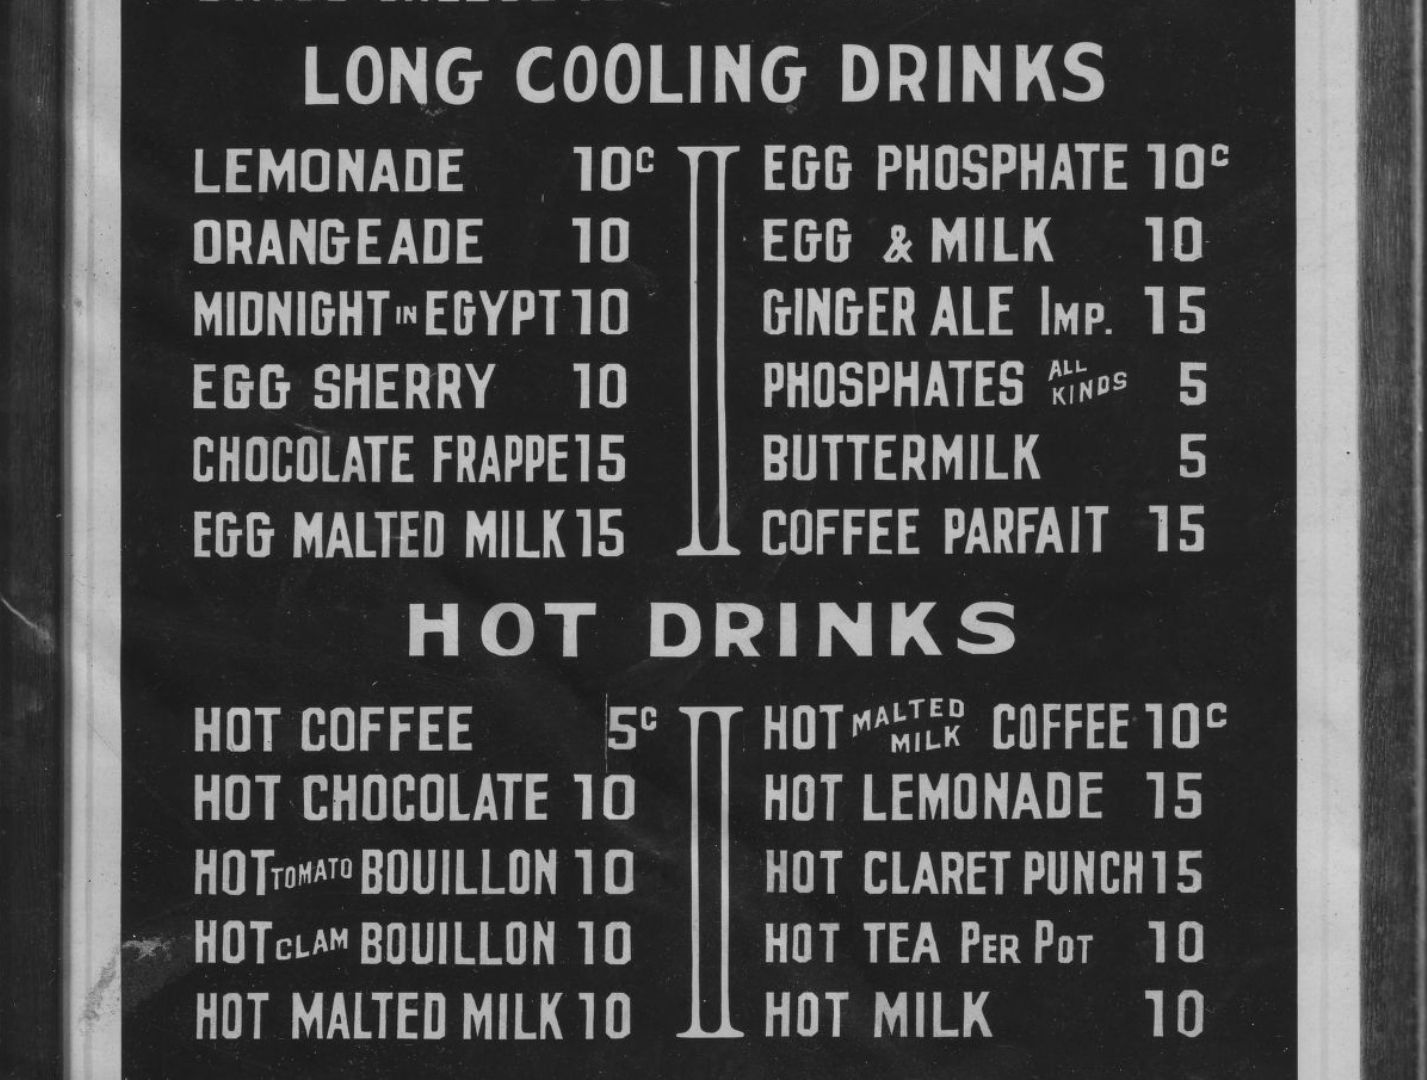 Portion of a menu set in white block lettering on a black background and showing "long cooling drinks" and "hot drinks".